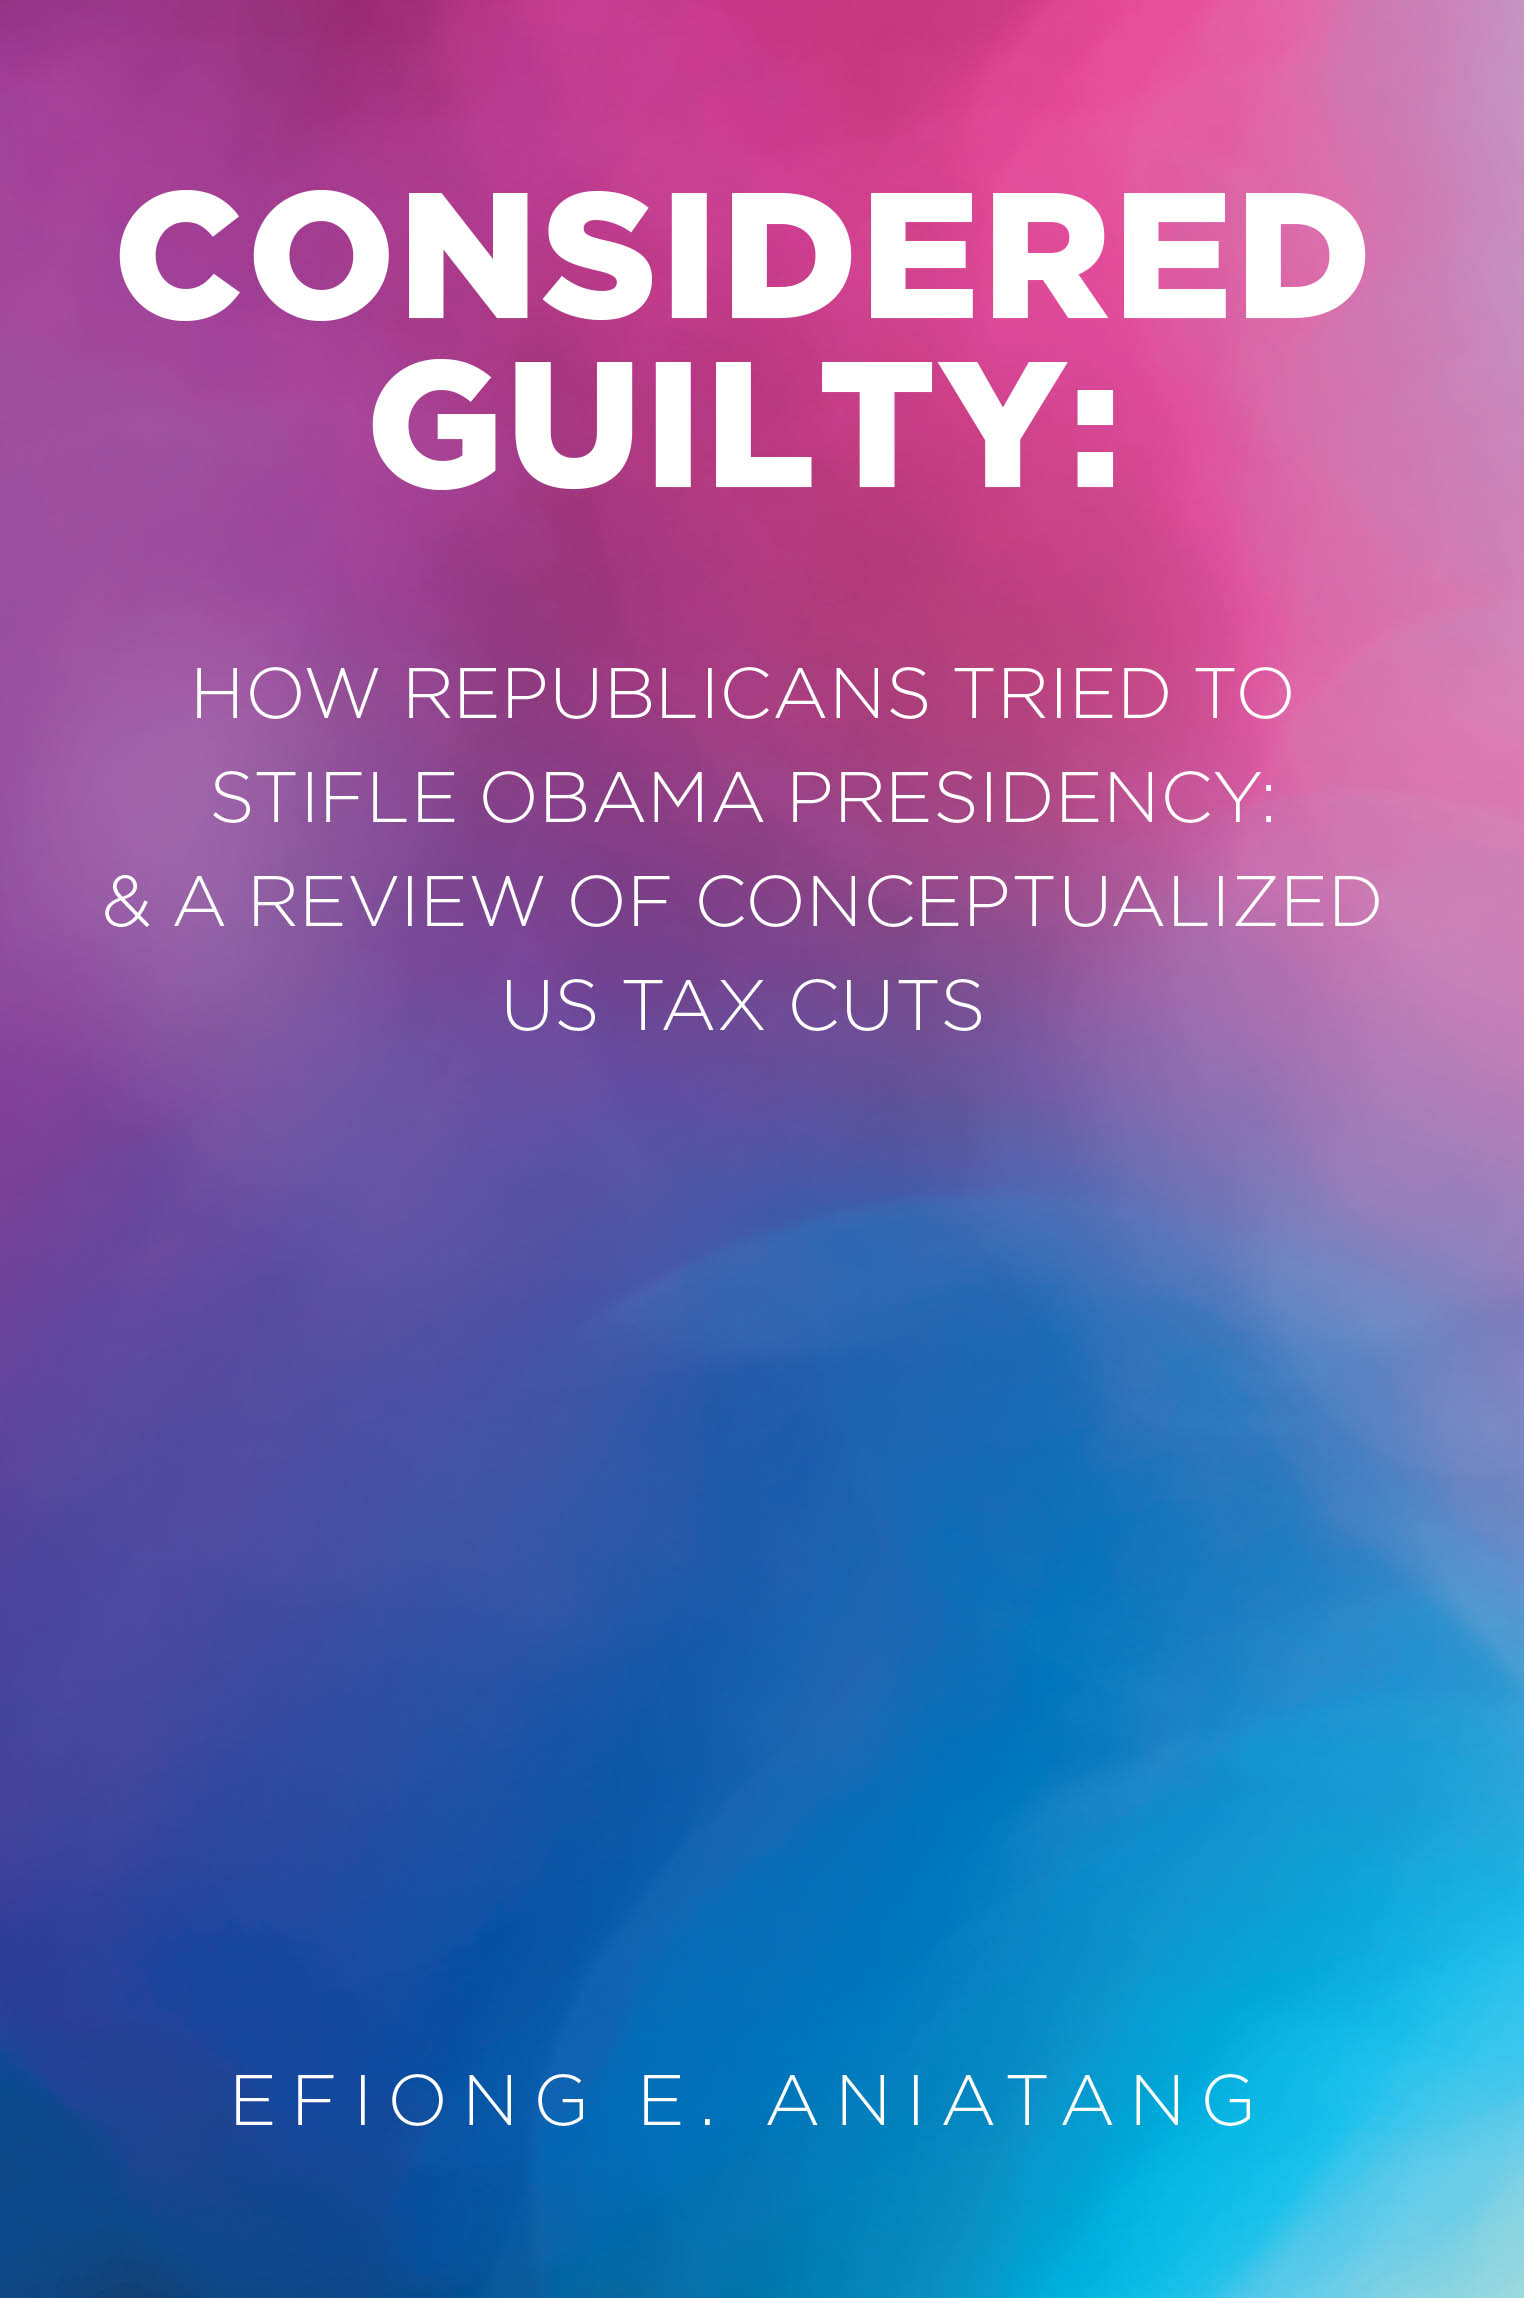 Efiong E. Aniatang’s New Book “Considered Guilty: How Republicans tried to stifle Obama Presidency & A Review of Conceptualized US Tax Cuts” is released